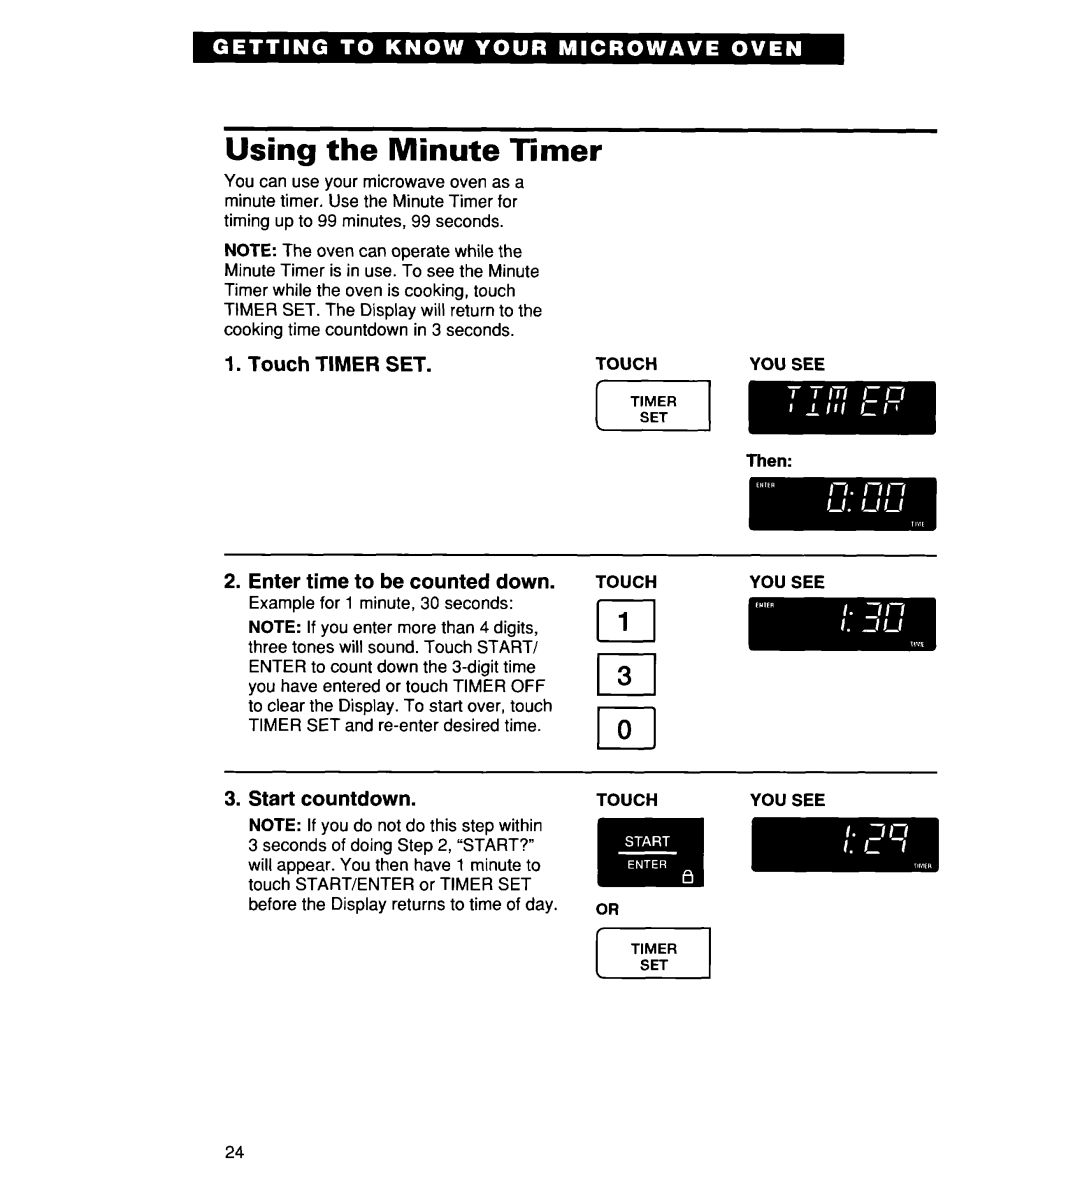 Whirlpool MH7135XE warranty Using the Minute Timer, Touch TIMER SET, Enter time to be counted down, Start countdown 